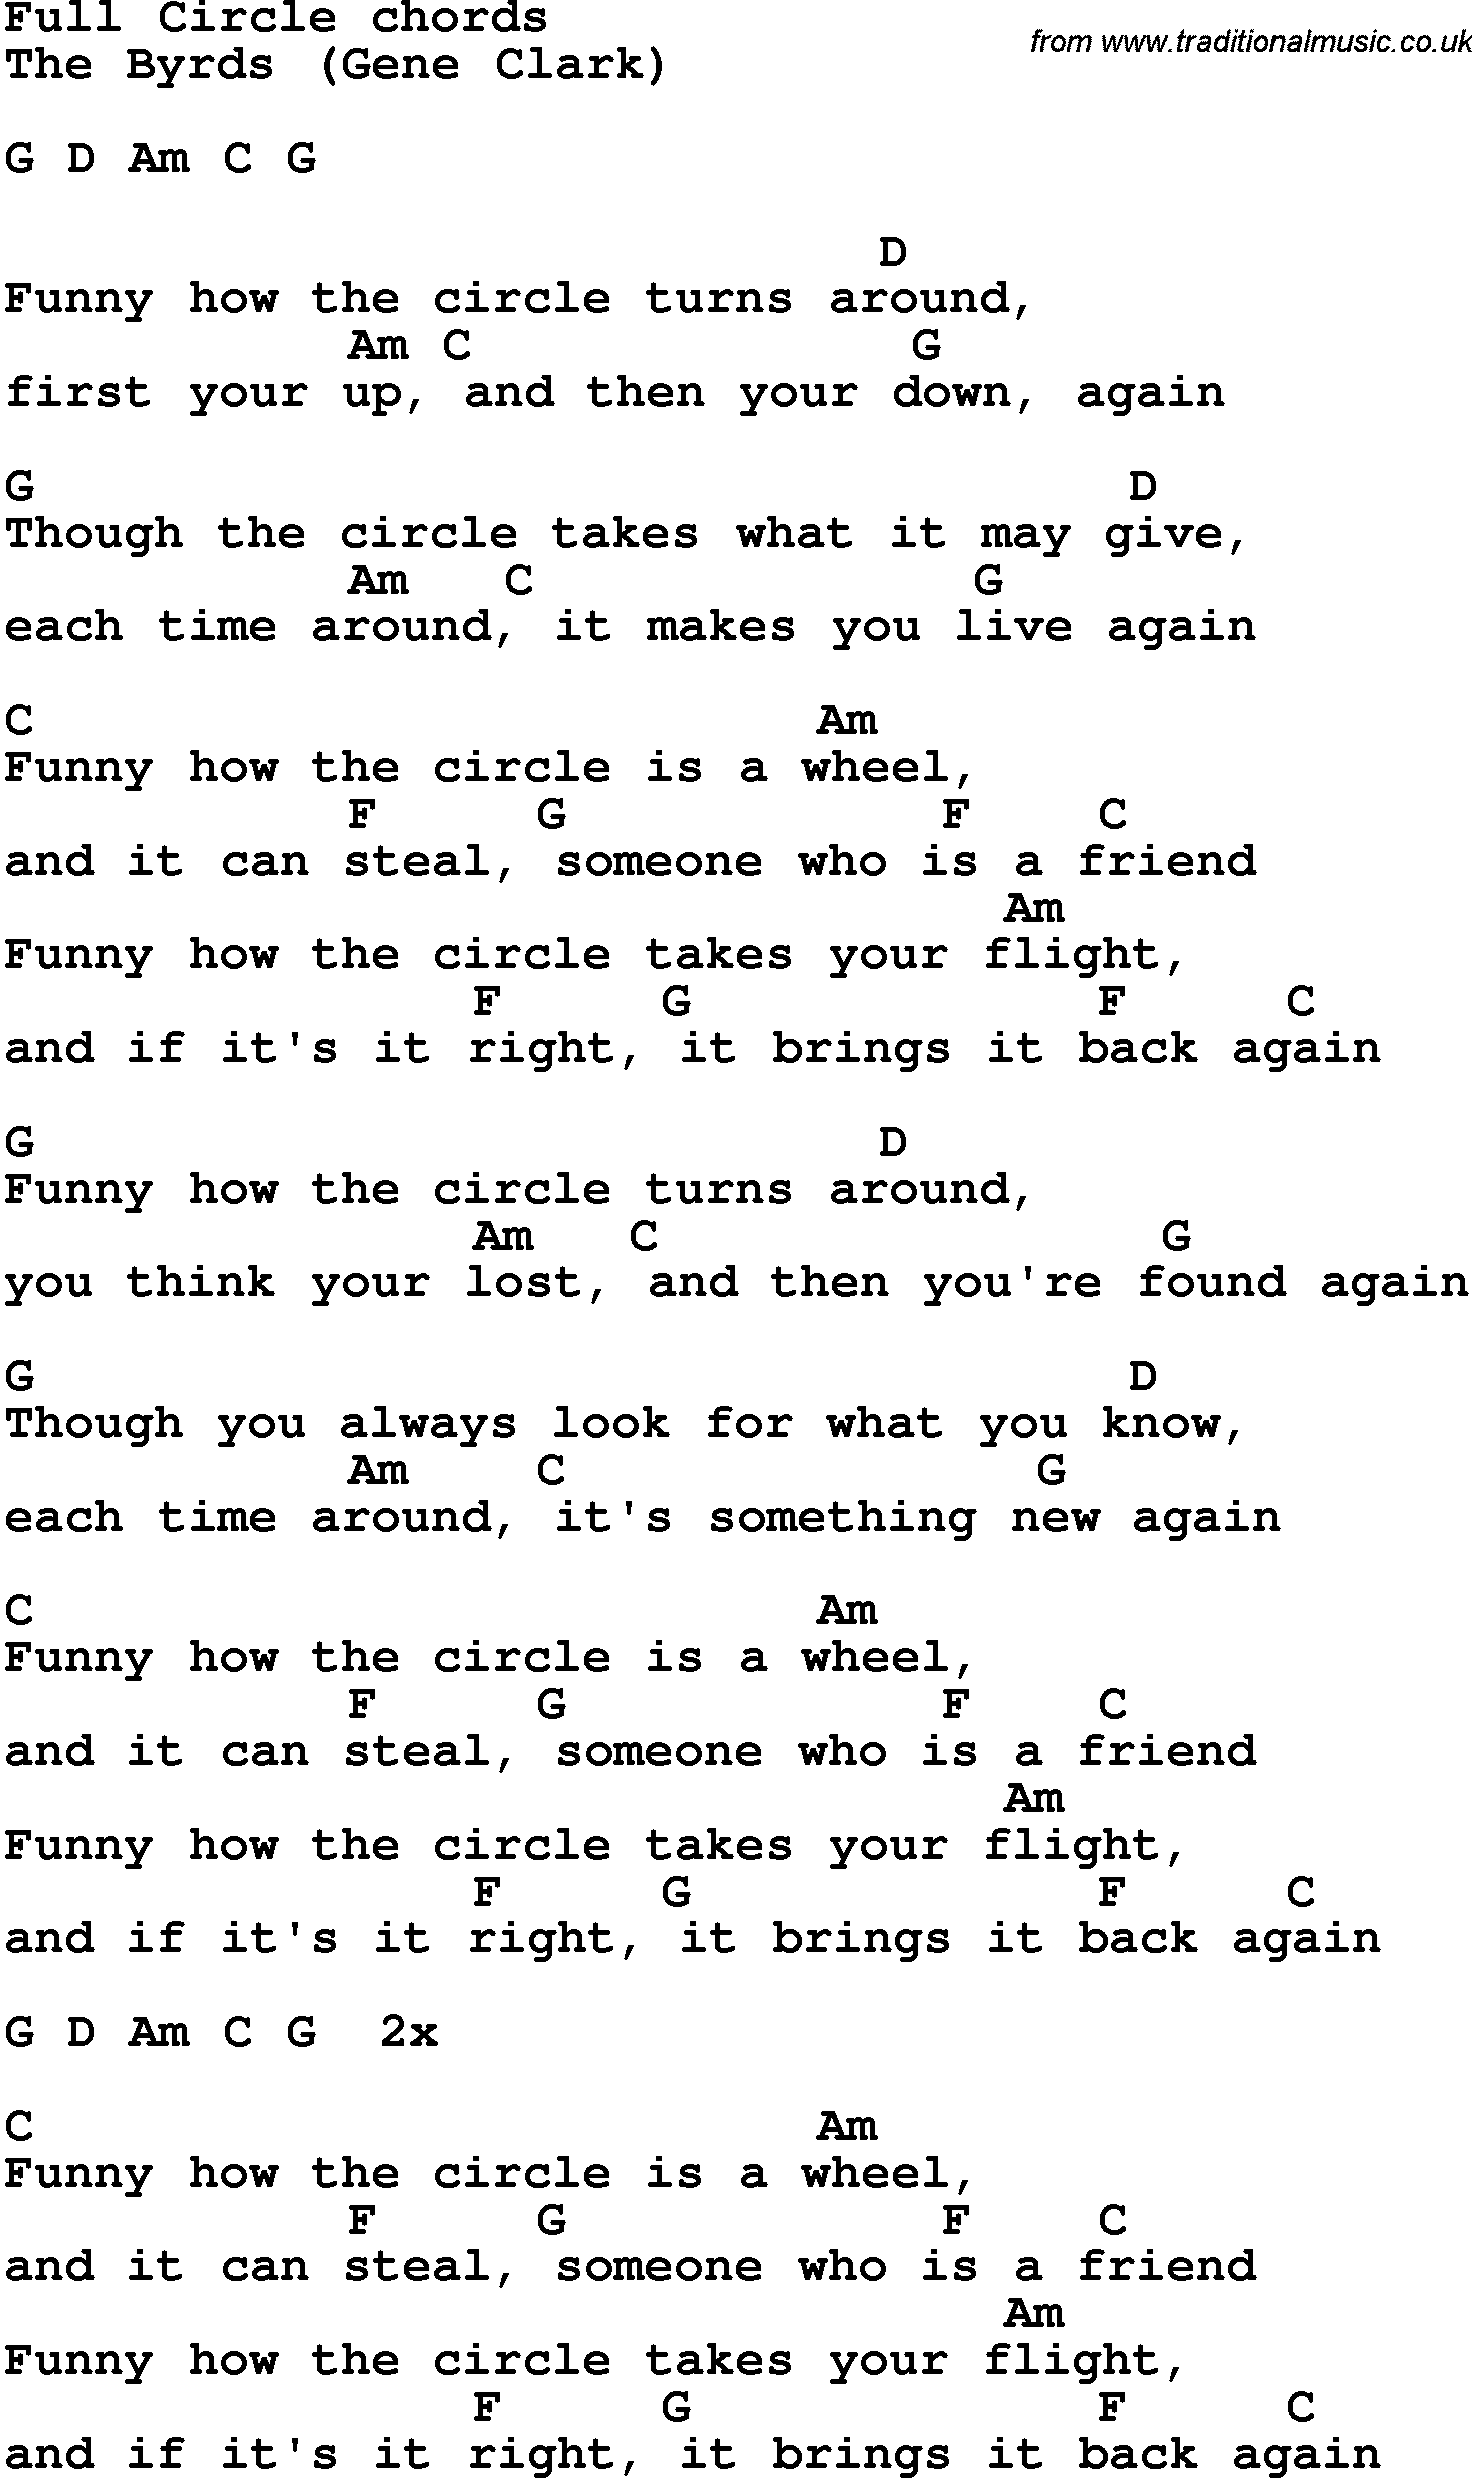 Song Lyrics with guitar chords for Full Circle